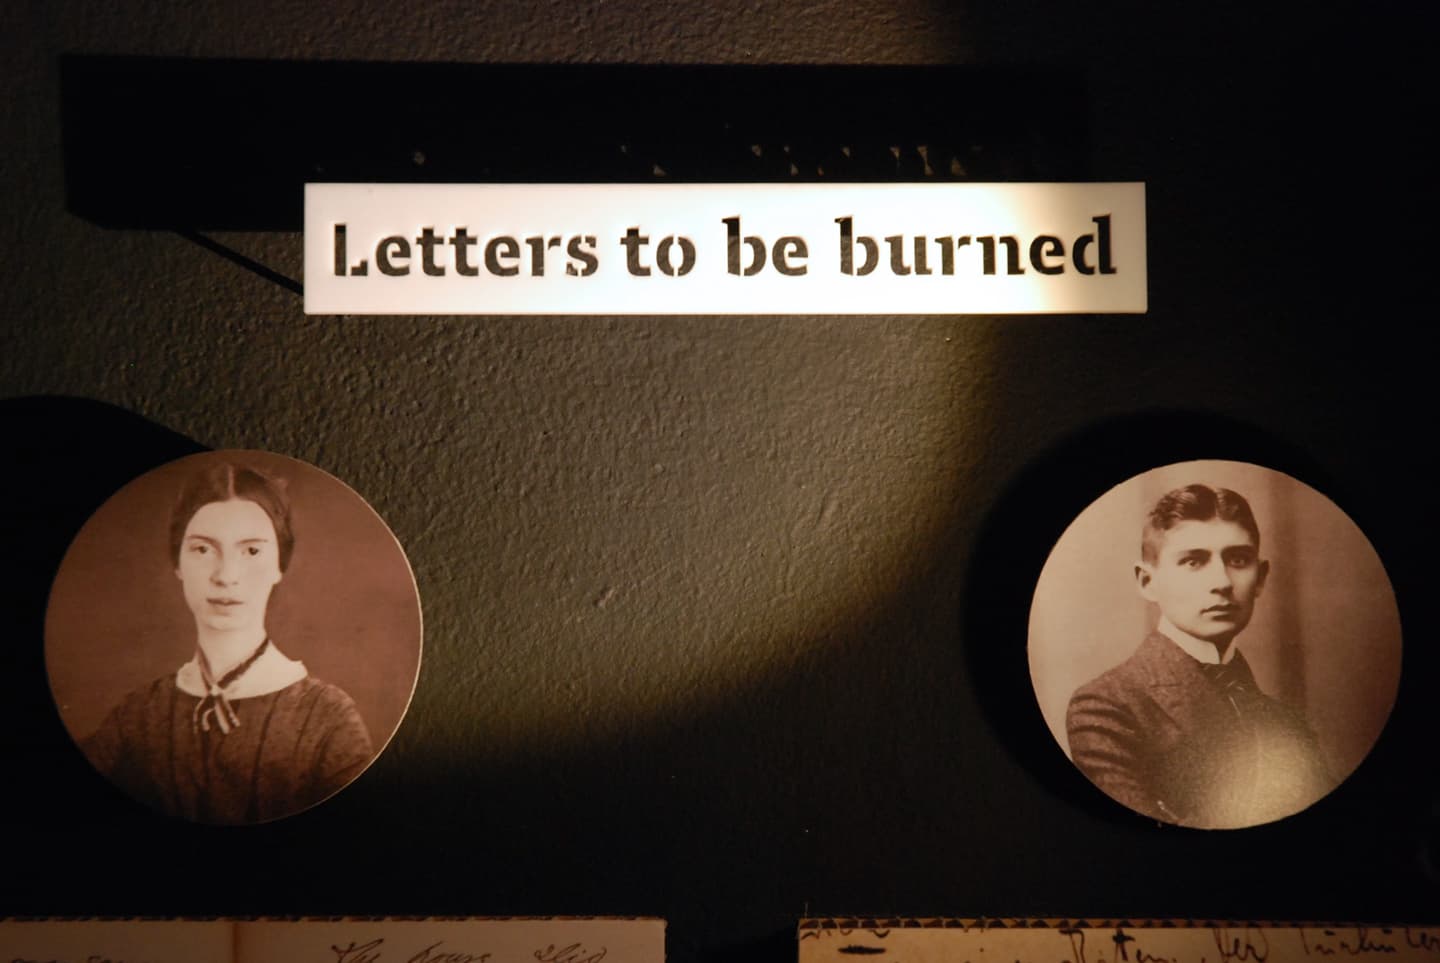 Letters to Be Burned exhibition is dedicated to Emily Dickinson and Franz Kafka